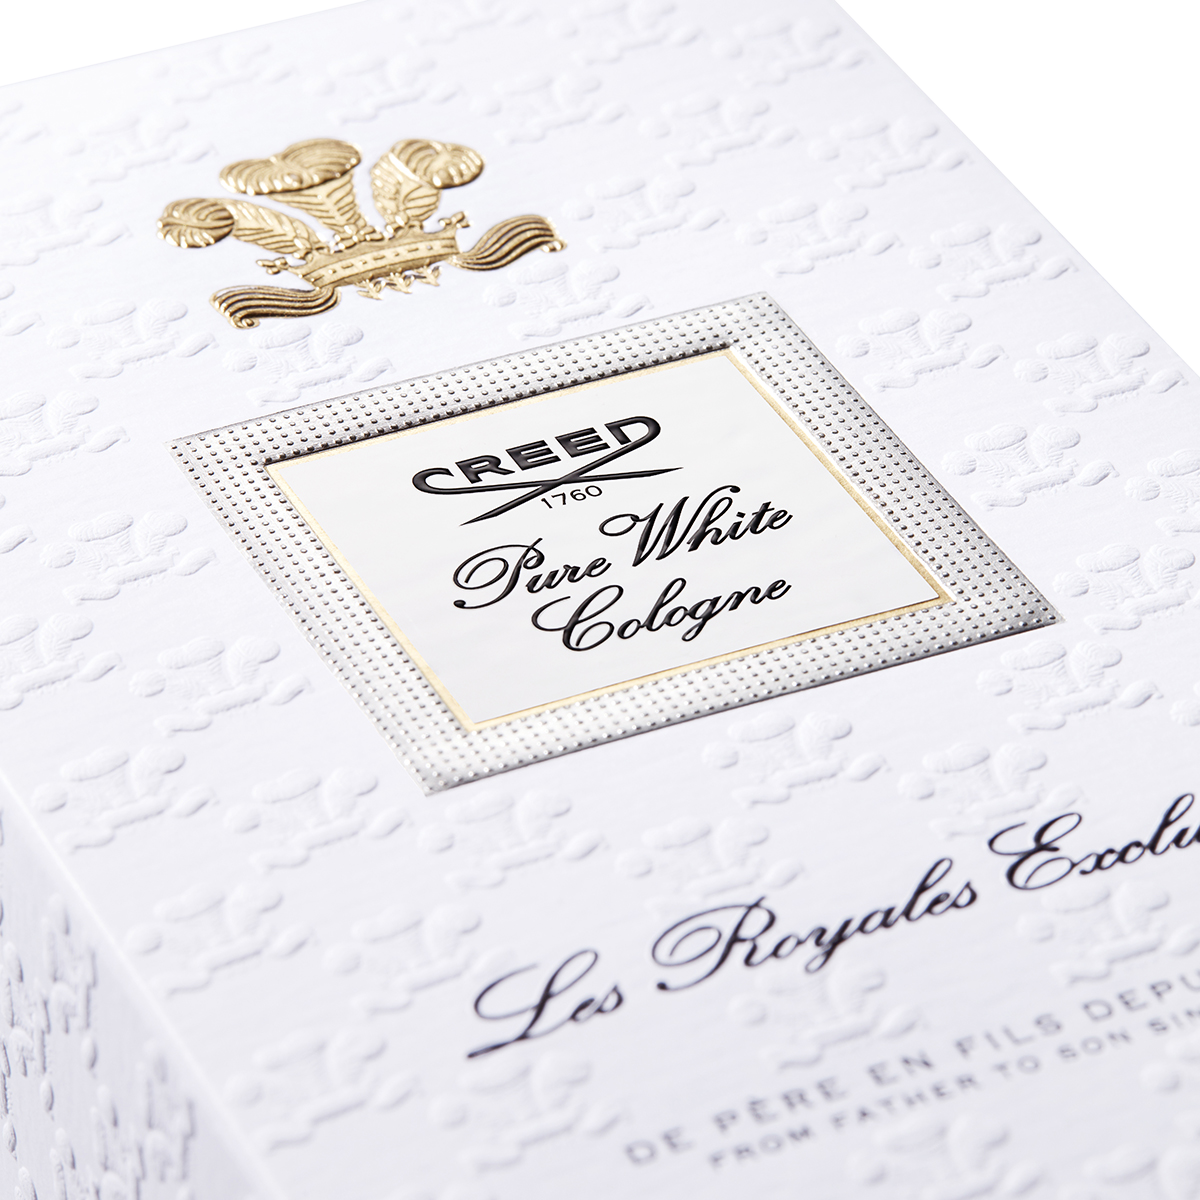 Creed - Royal Exclusives Pure White